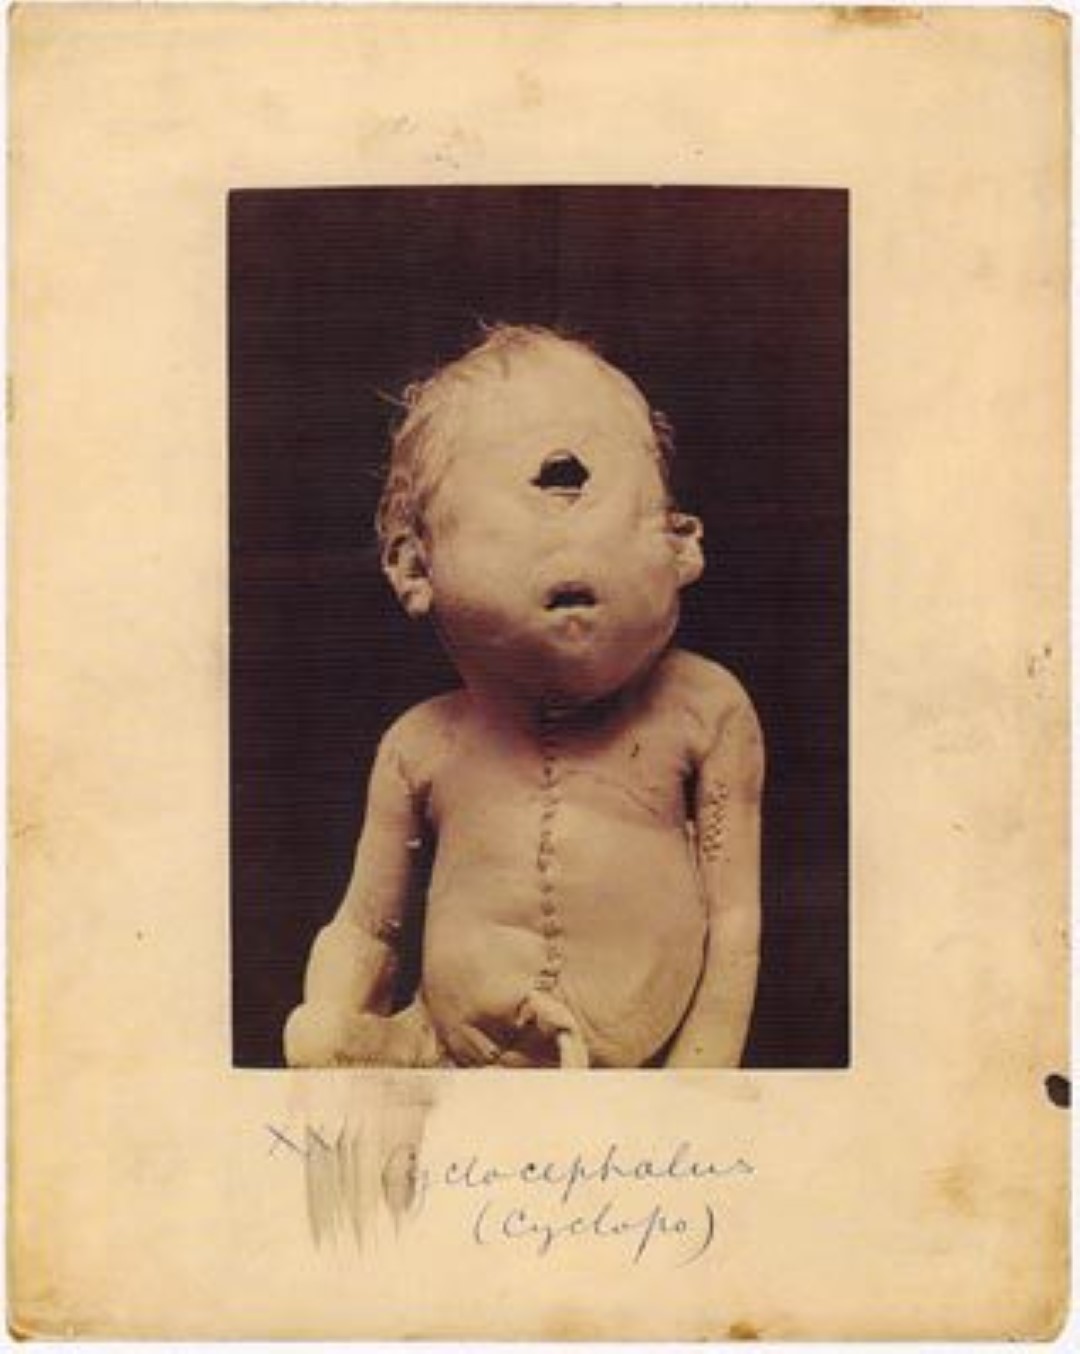 Cyclopia is a rare birth defect in which the body is unable to properly separate the two eye sockets so they remain merged as one. The majority of babies suffering this disease are stillborn but if they survive it is not usually for more than a few hours.